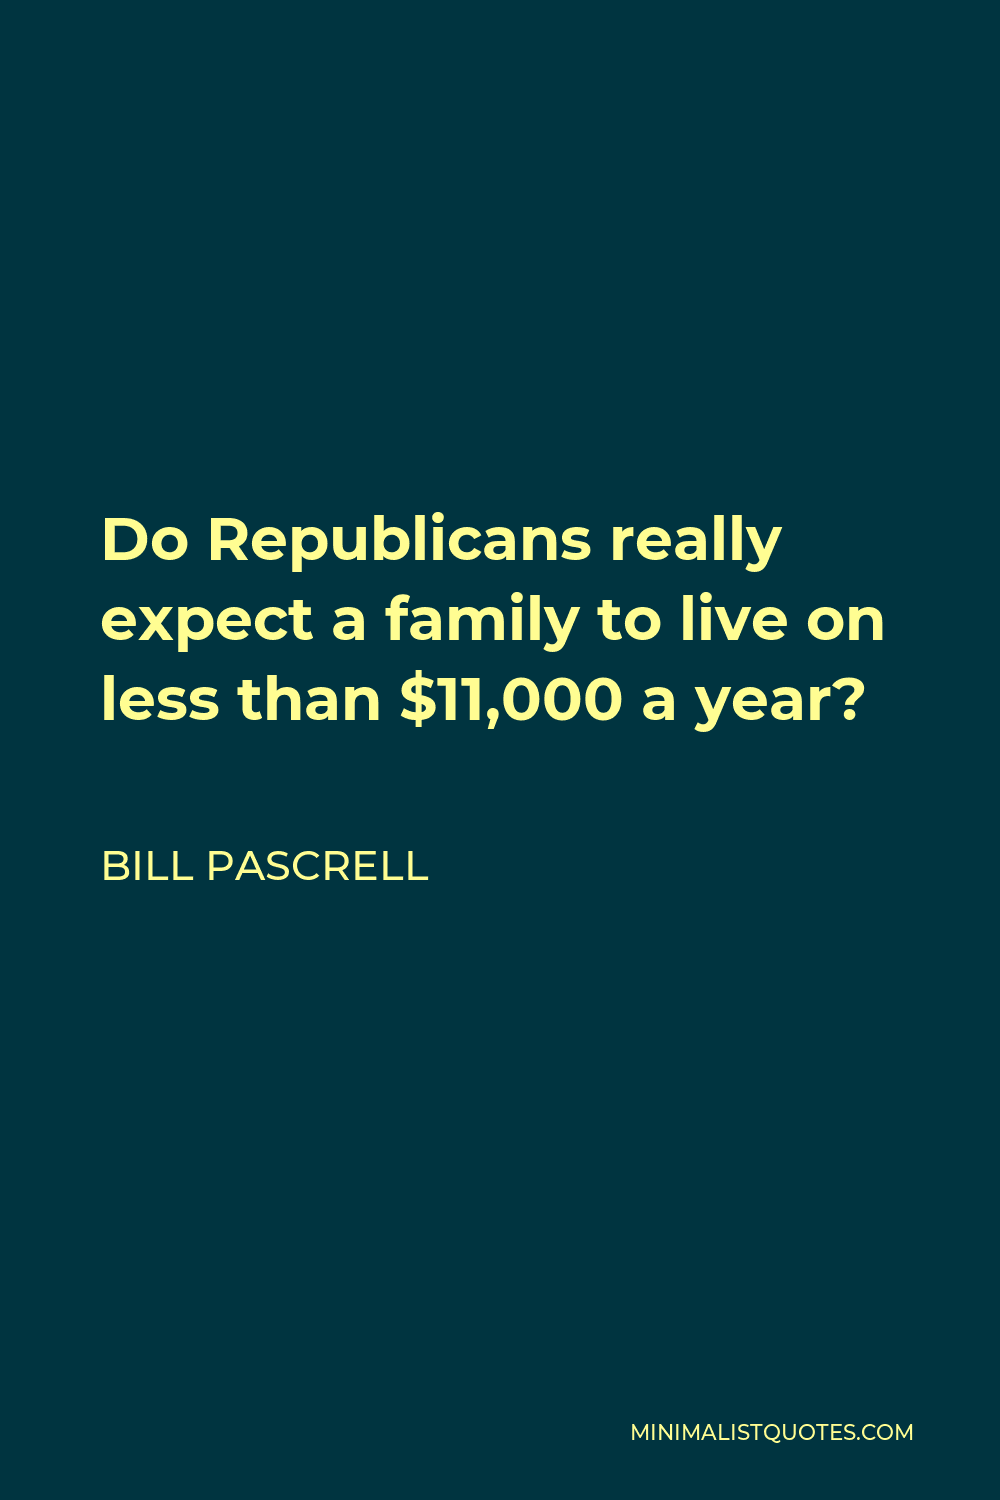 Bill Pascrell Quote - Do Republicans really expect a family to live on less than $11,000 a year?